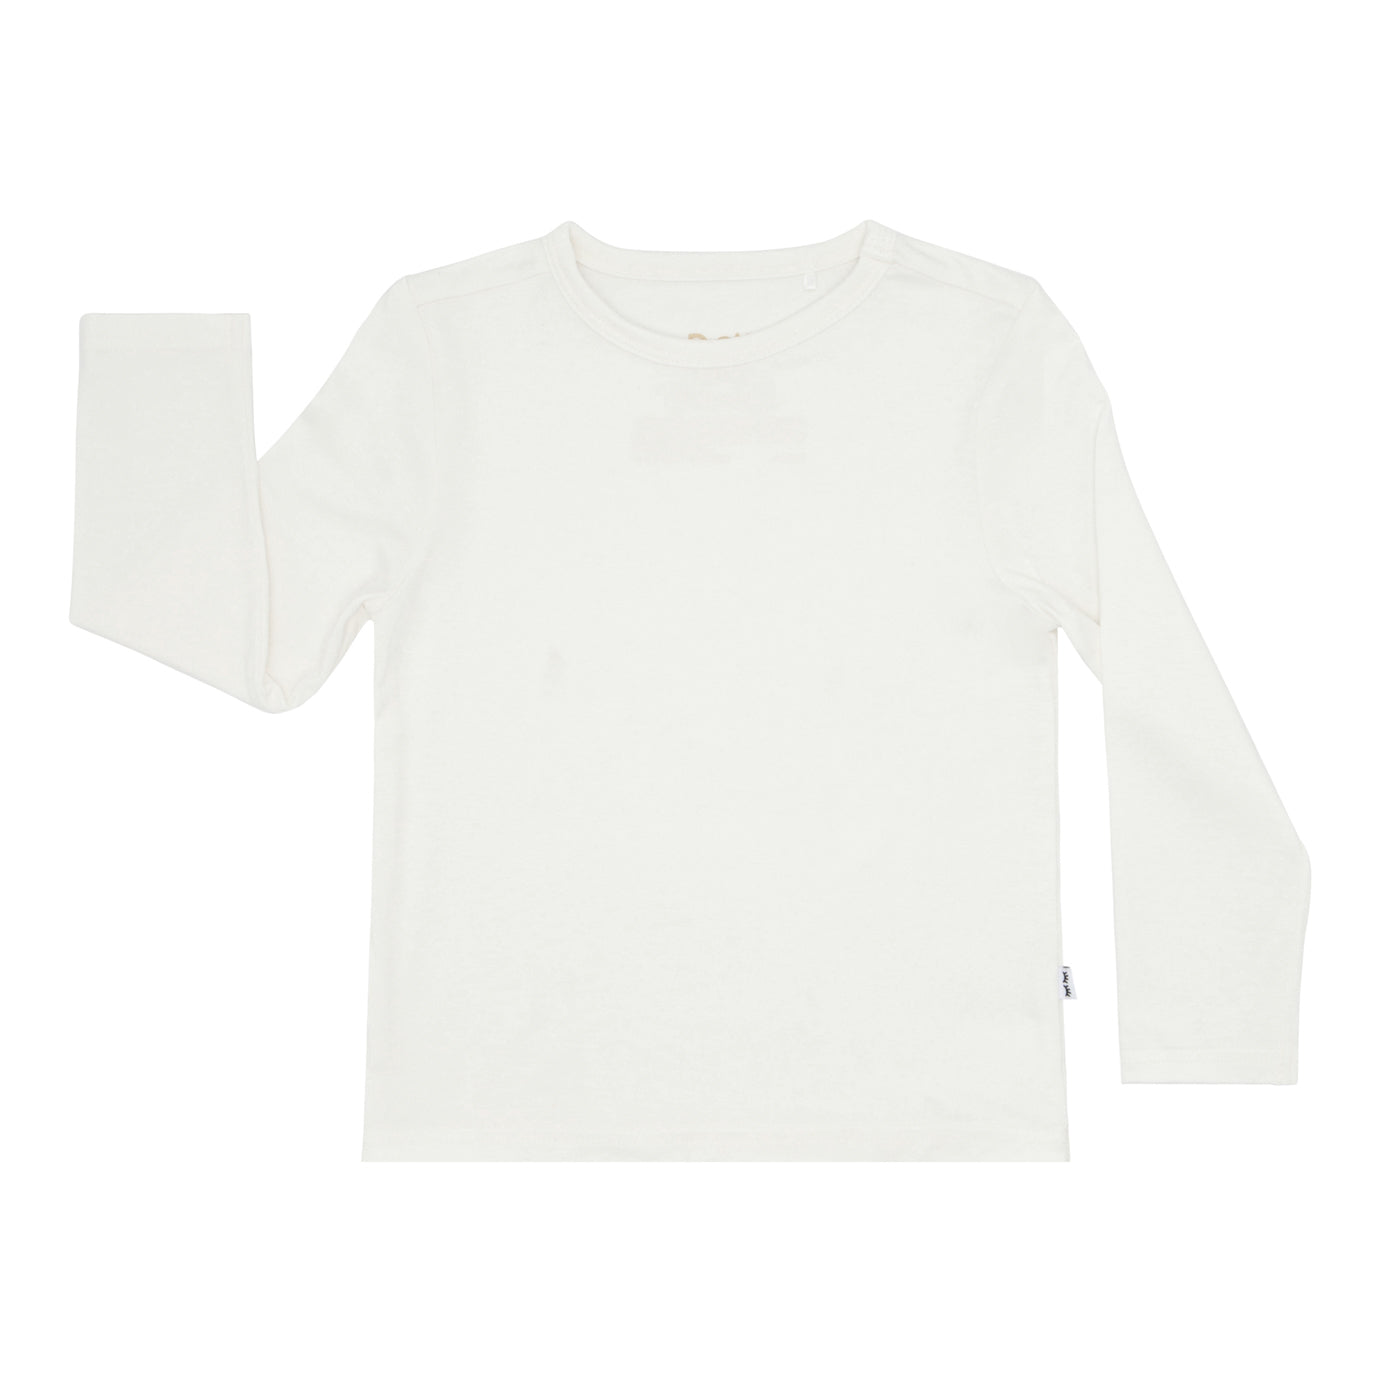 Flat lay image of an Ivory classic tee